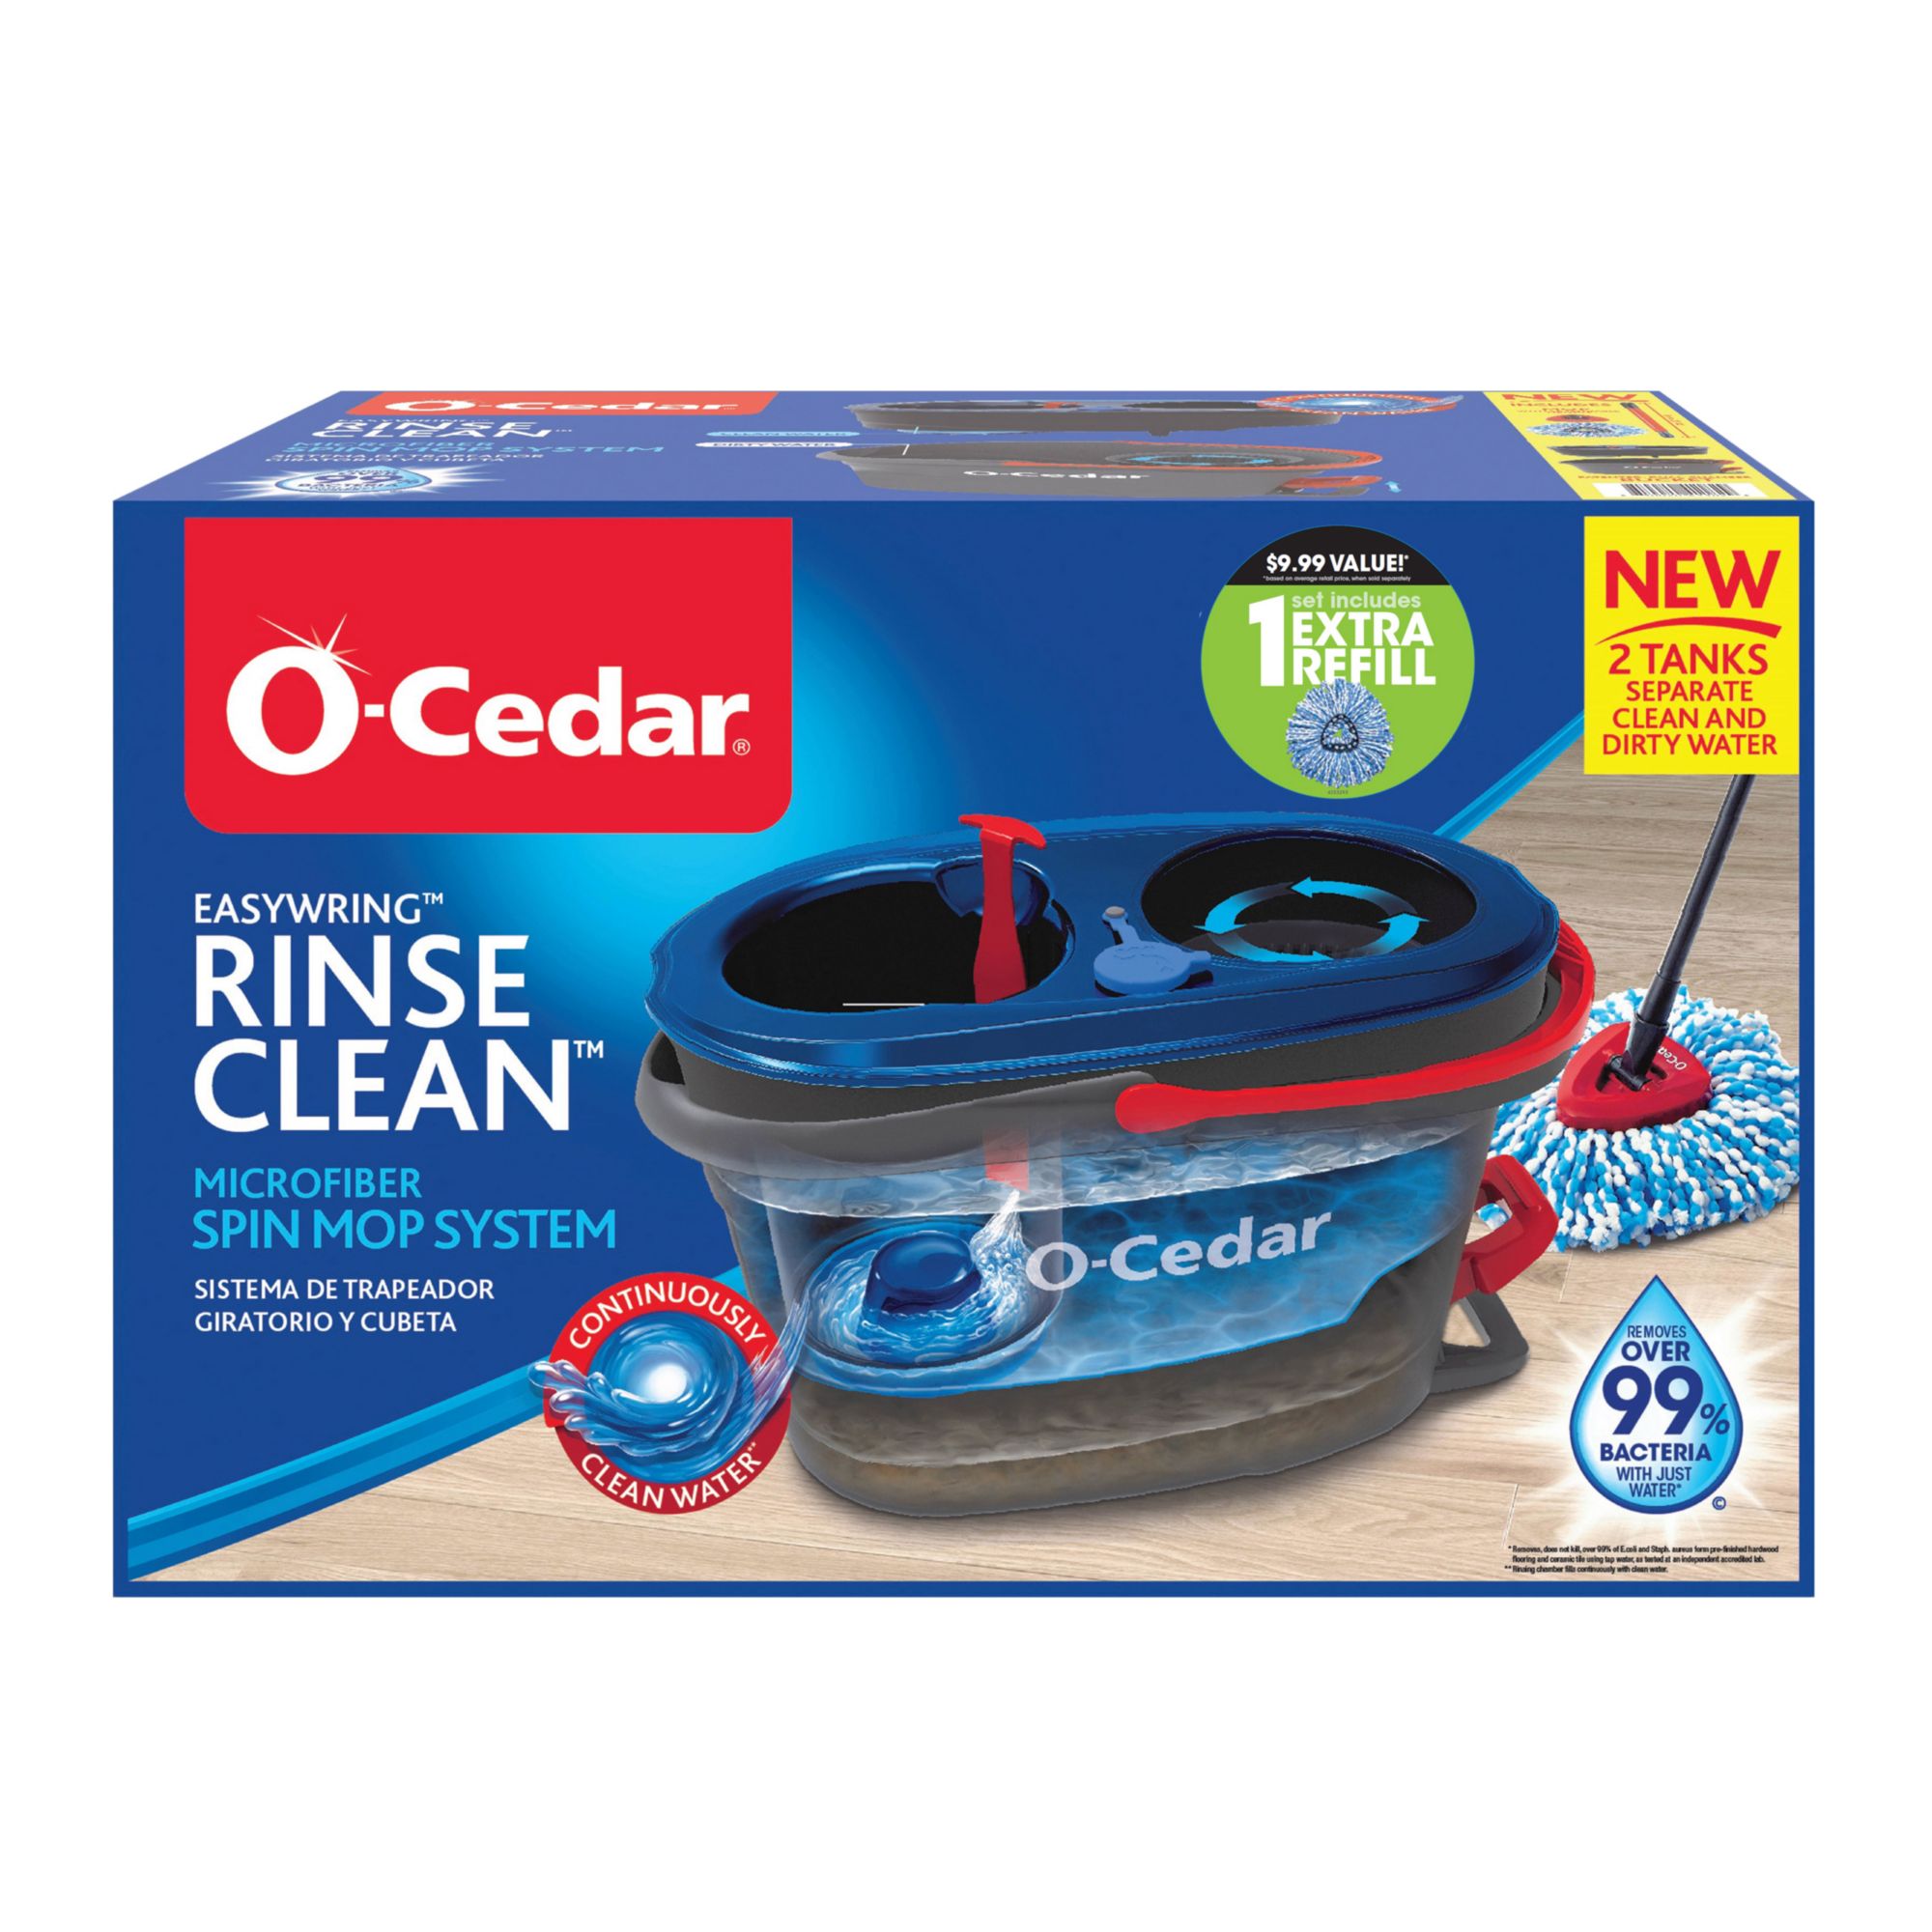 O-Cedar EasyWring RinseClean Spin Mop & Bucket System +1 Refill